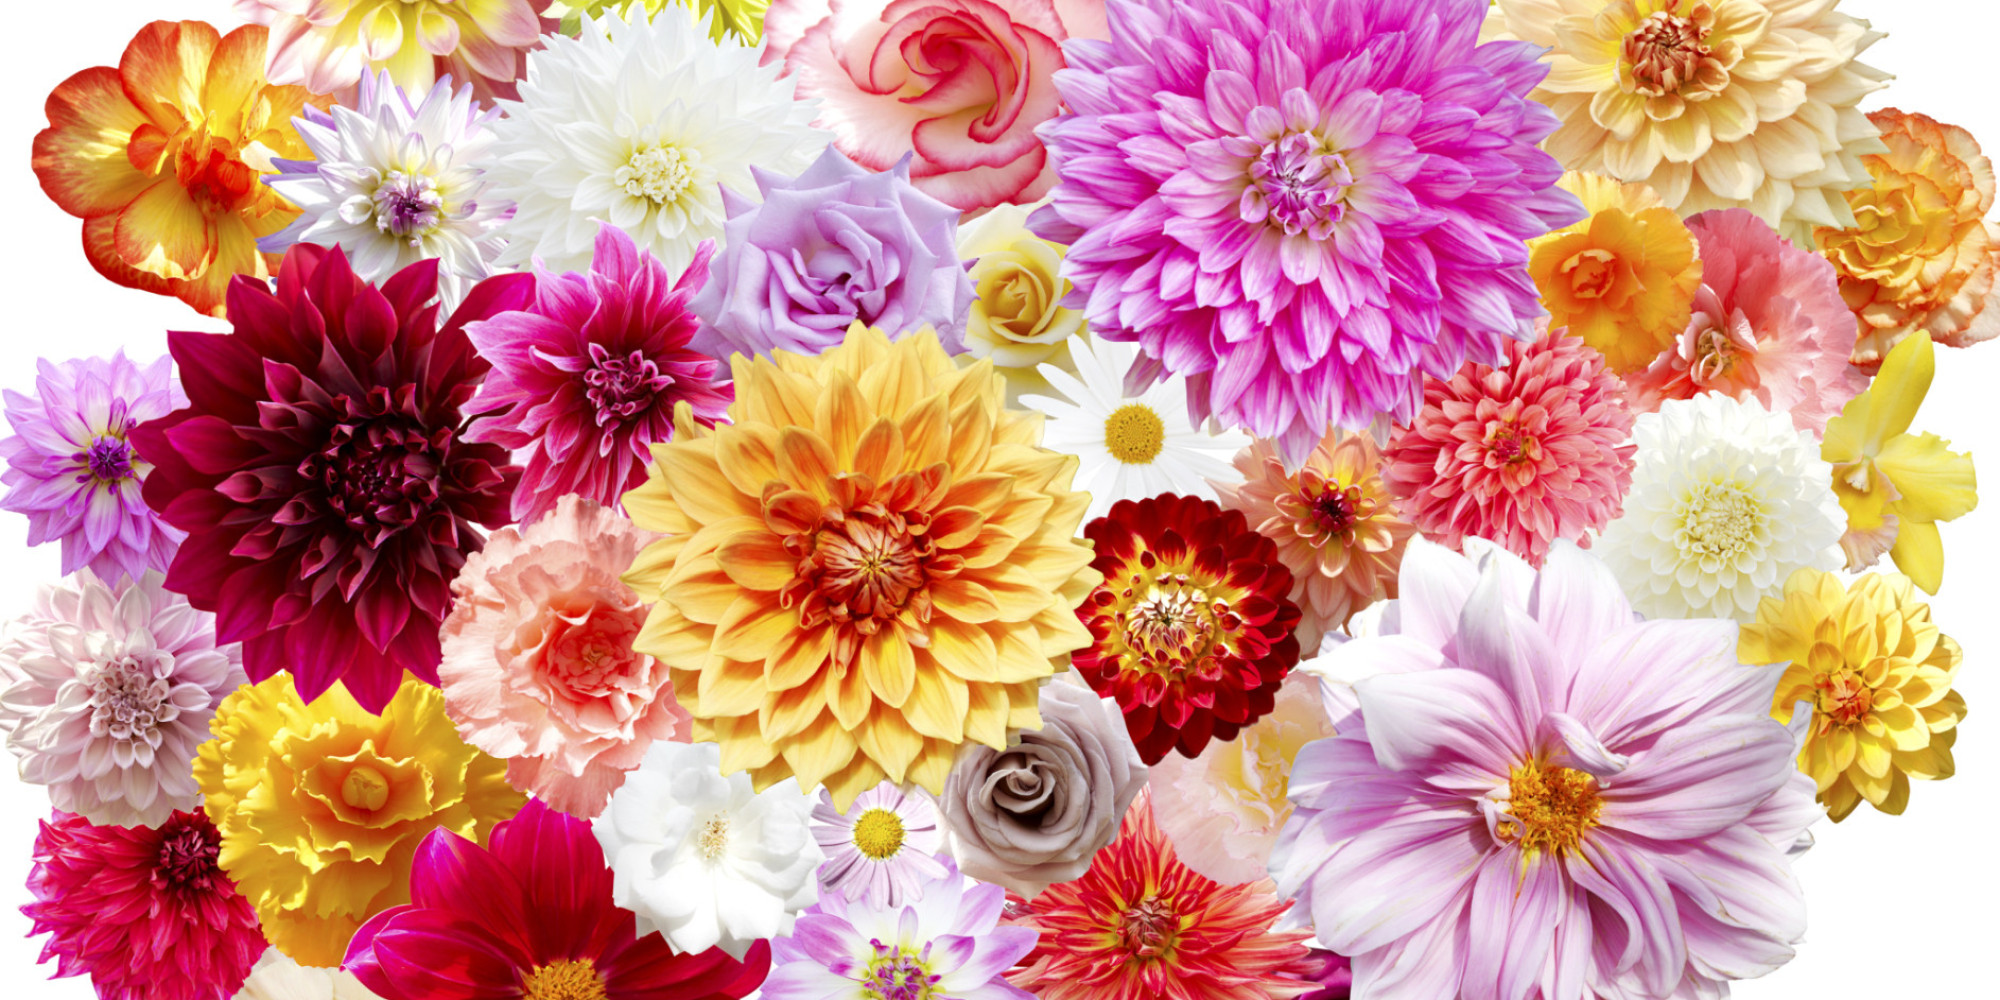 4 Easy Ways to Keep Your Flowers Alive Longer | HuffPost